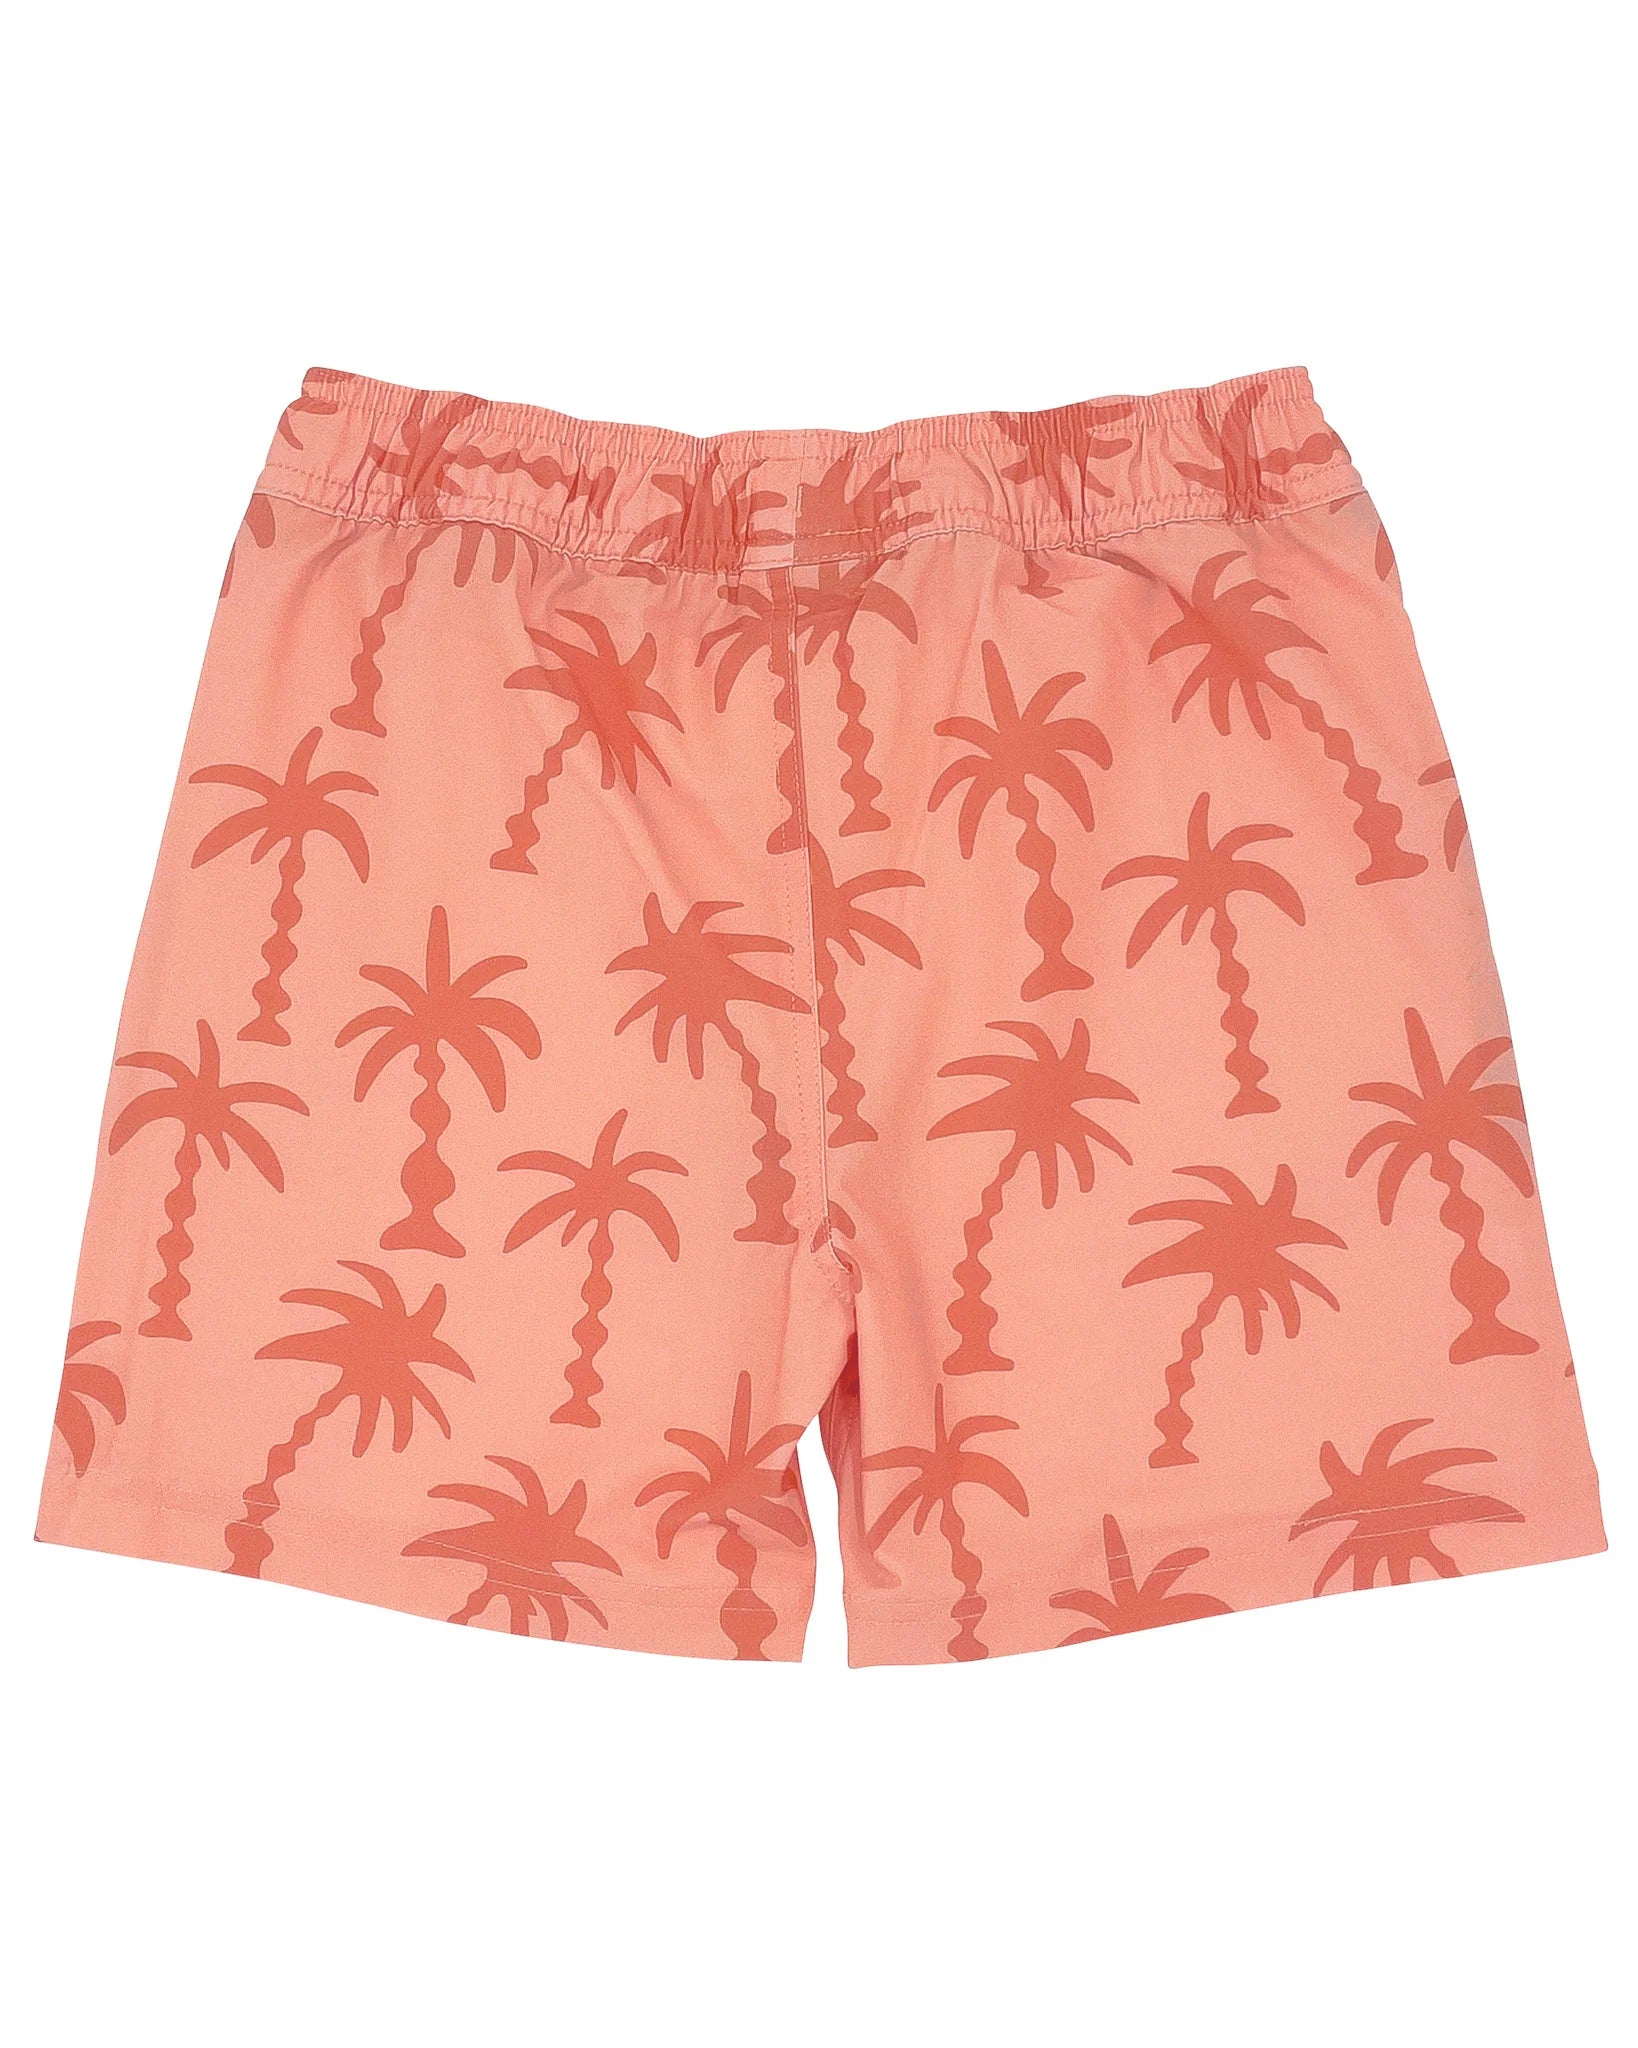 Wavy Palm Volley Trunks  - Doodlebug's Children's Boutique